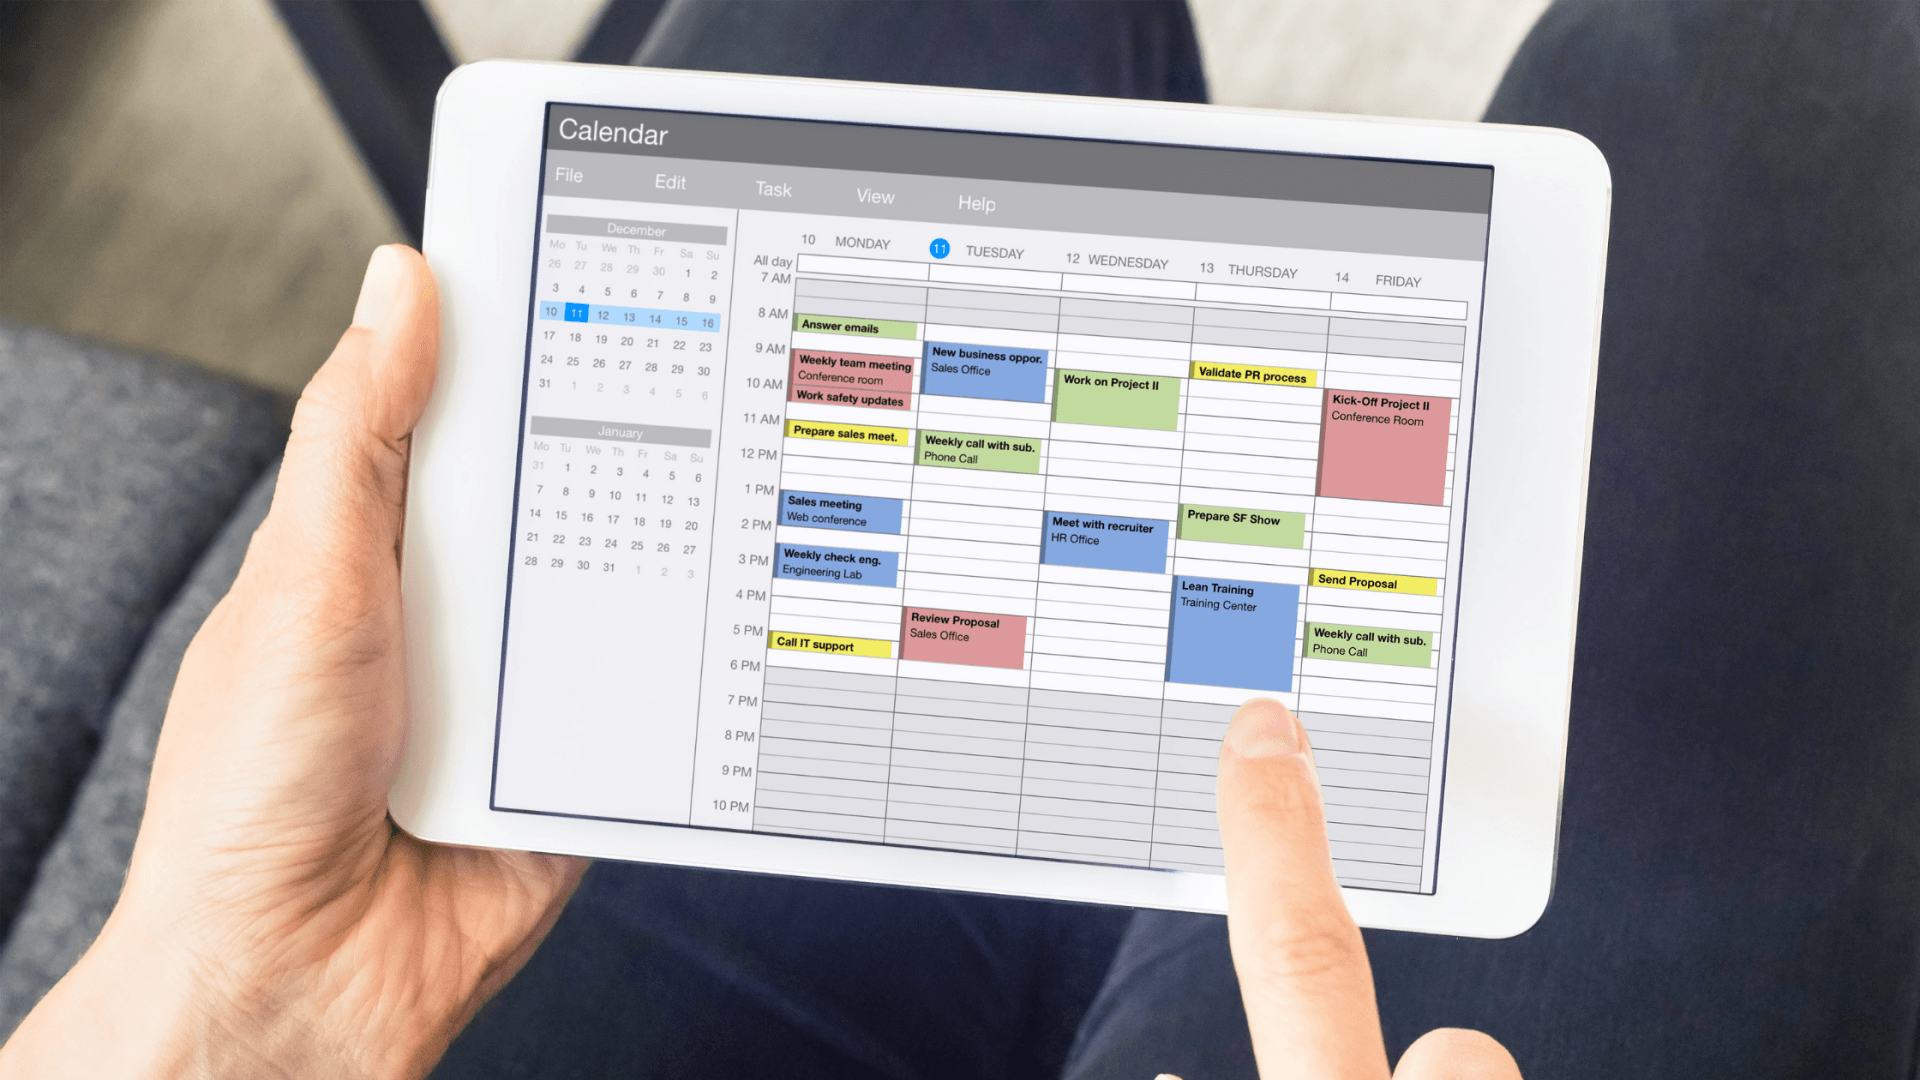 Freelancing gives you a flexible schedule